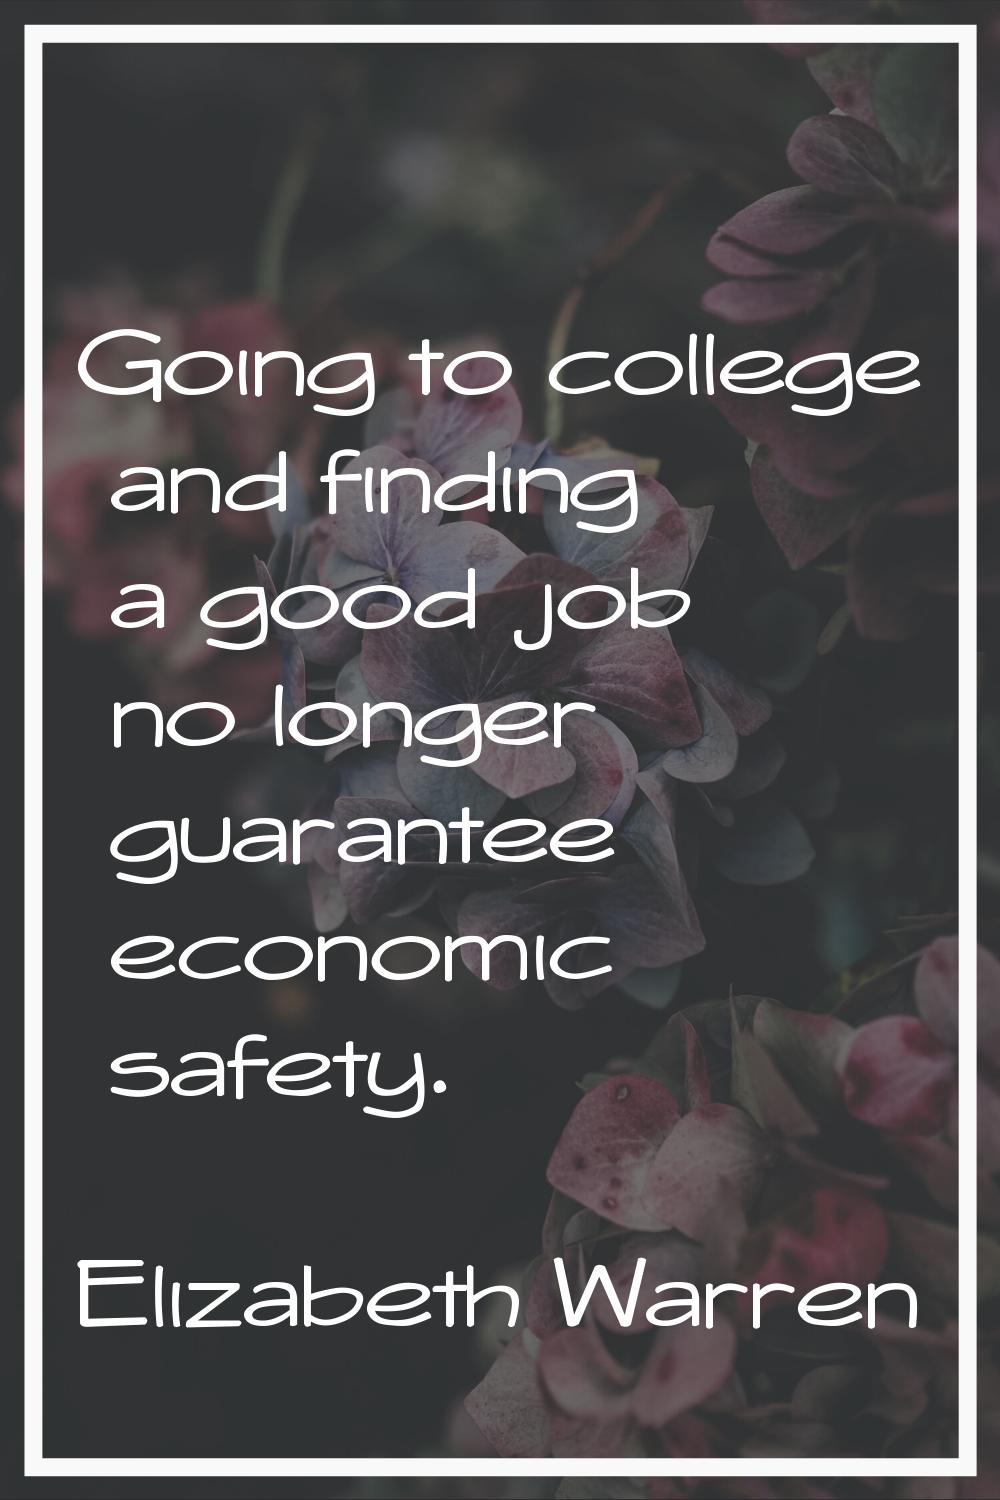 Going to college and finding a good job no longer guarantee economic safety.